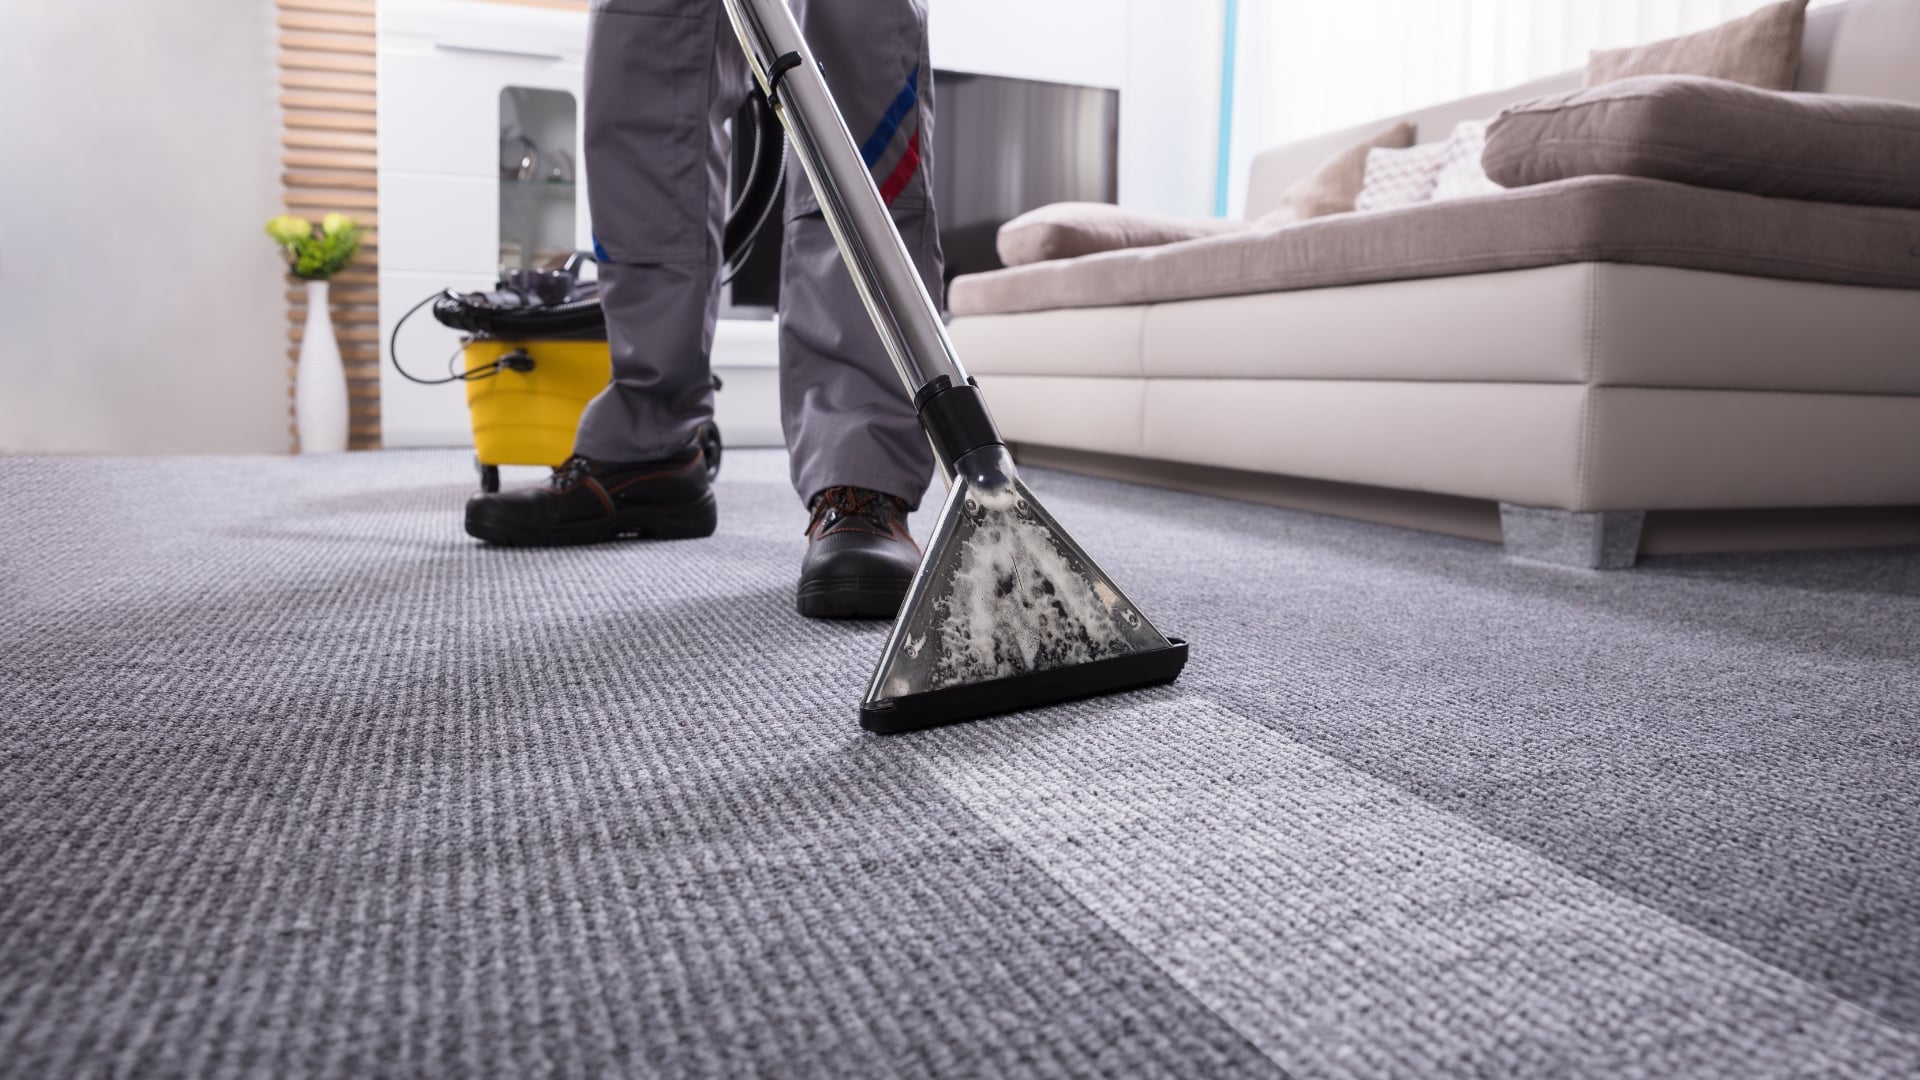 Emergency Carpet Cleaning in Lincoln, NE